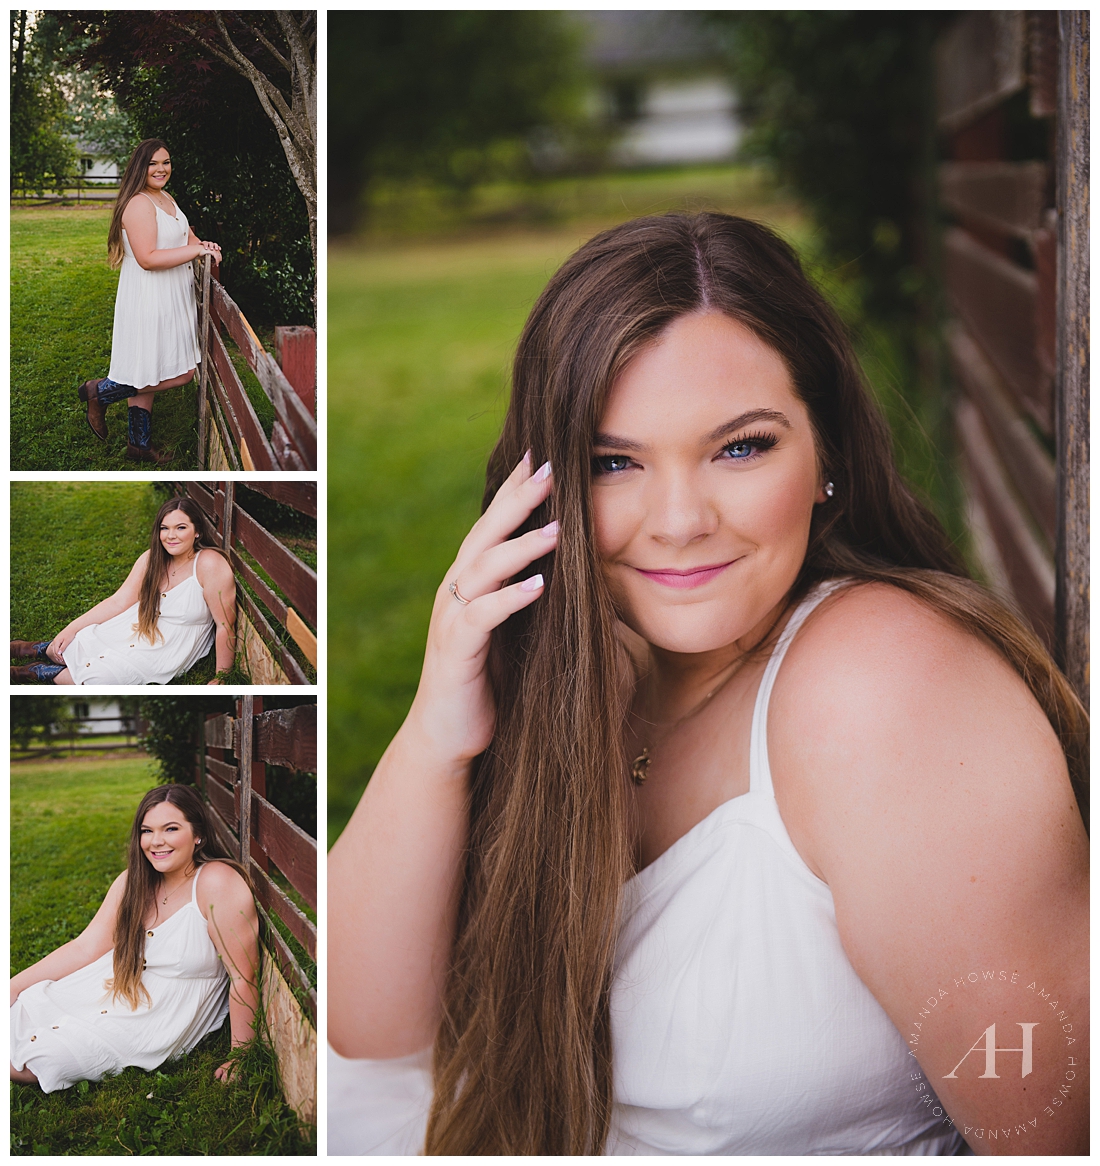 Cute Senior Portraits in July | Outdoor Senior Portrait Session | Photographed by the Best Tacoma Senior Photographer Amanda Howse Photography